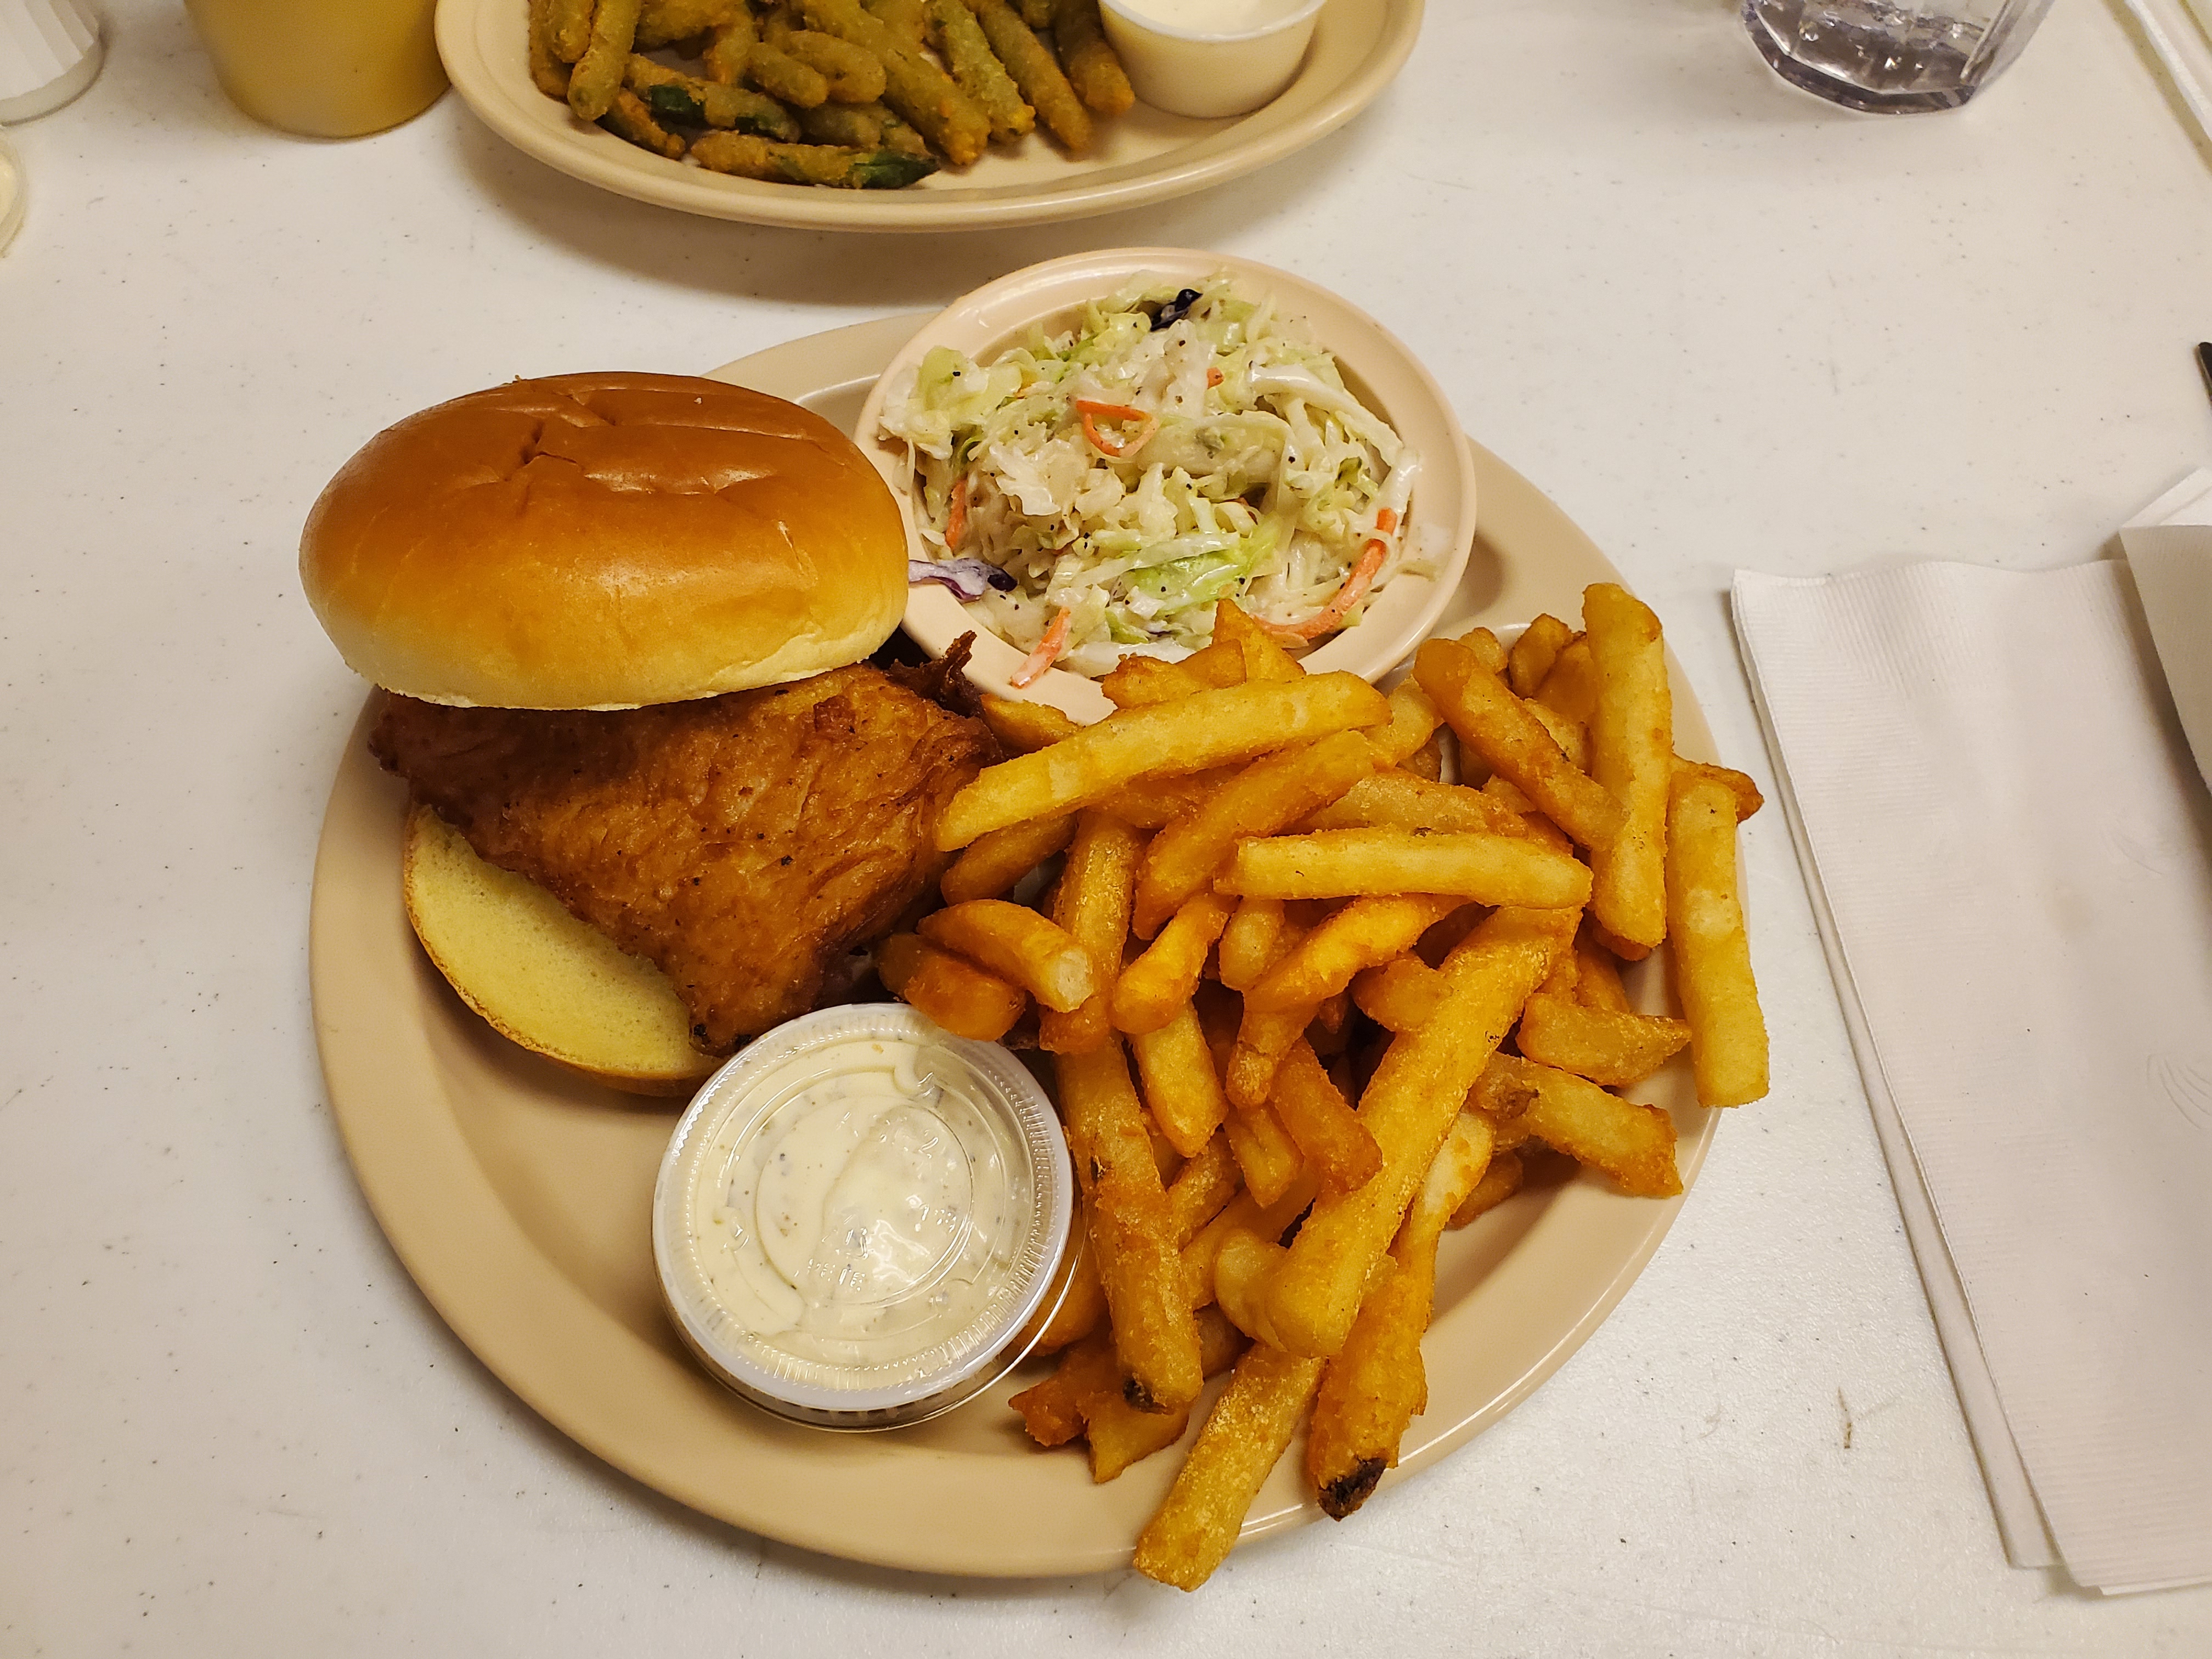 Fish and chips with a side of slaw. Photo by Carl Busch.